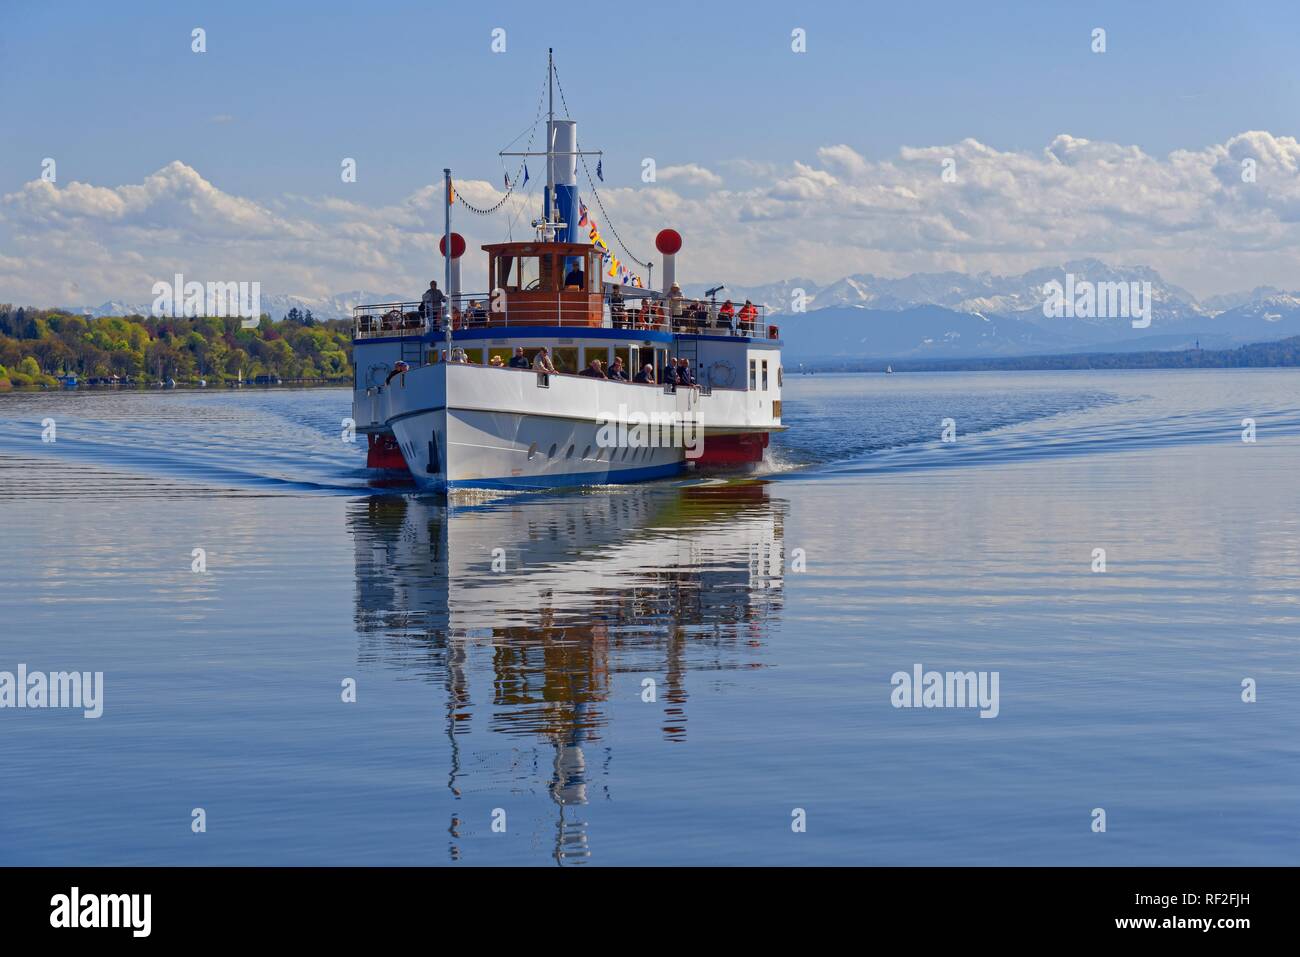 Historic paddle steamer Dießen on the Lake Ammer with the snow-covered Zugspitzmassiv in the background, Lake Ammer, Stegen Stock Photo